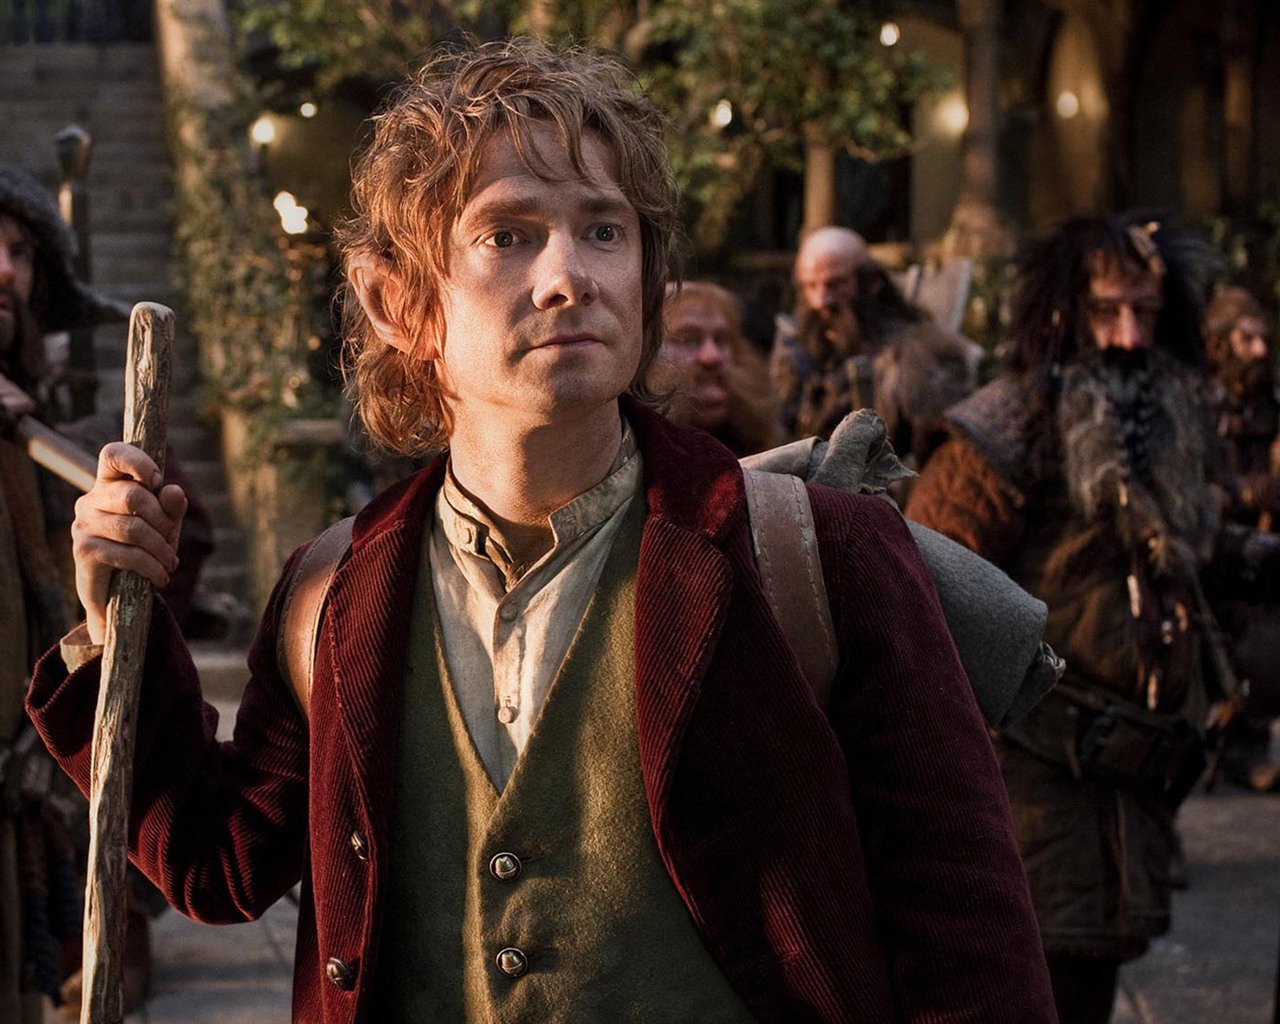 The Hobbit: An Unexpected Journey HD wallpapers #3 - 1280x1024